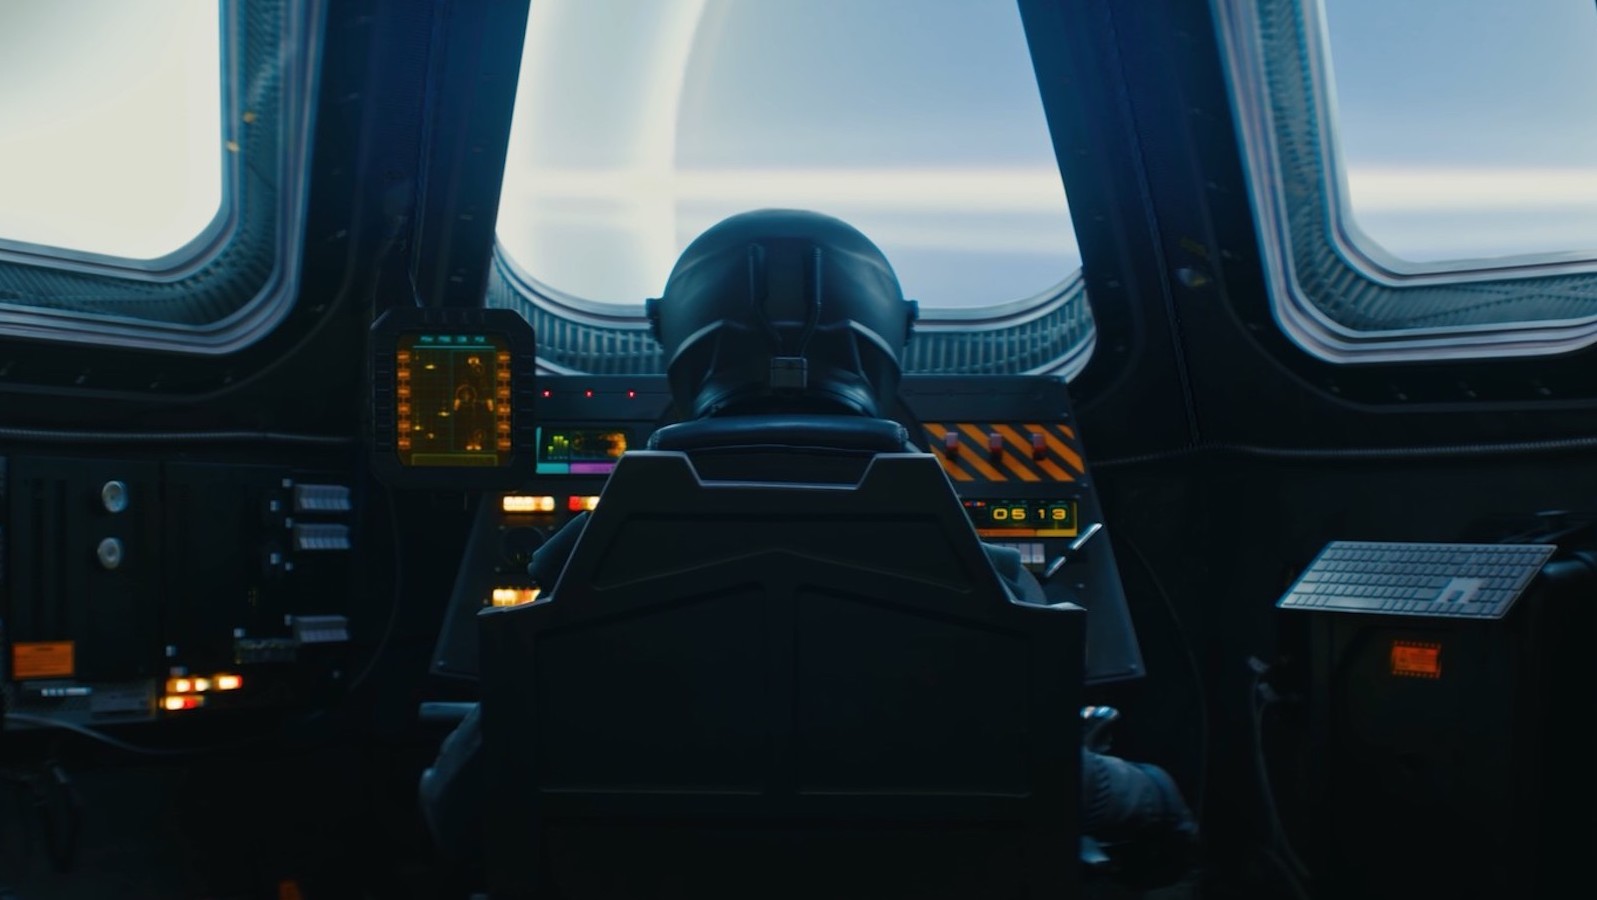 An image of a helmeted pilot in a spaceship, seen from behind, looking out a front windshield